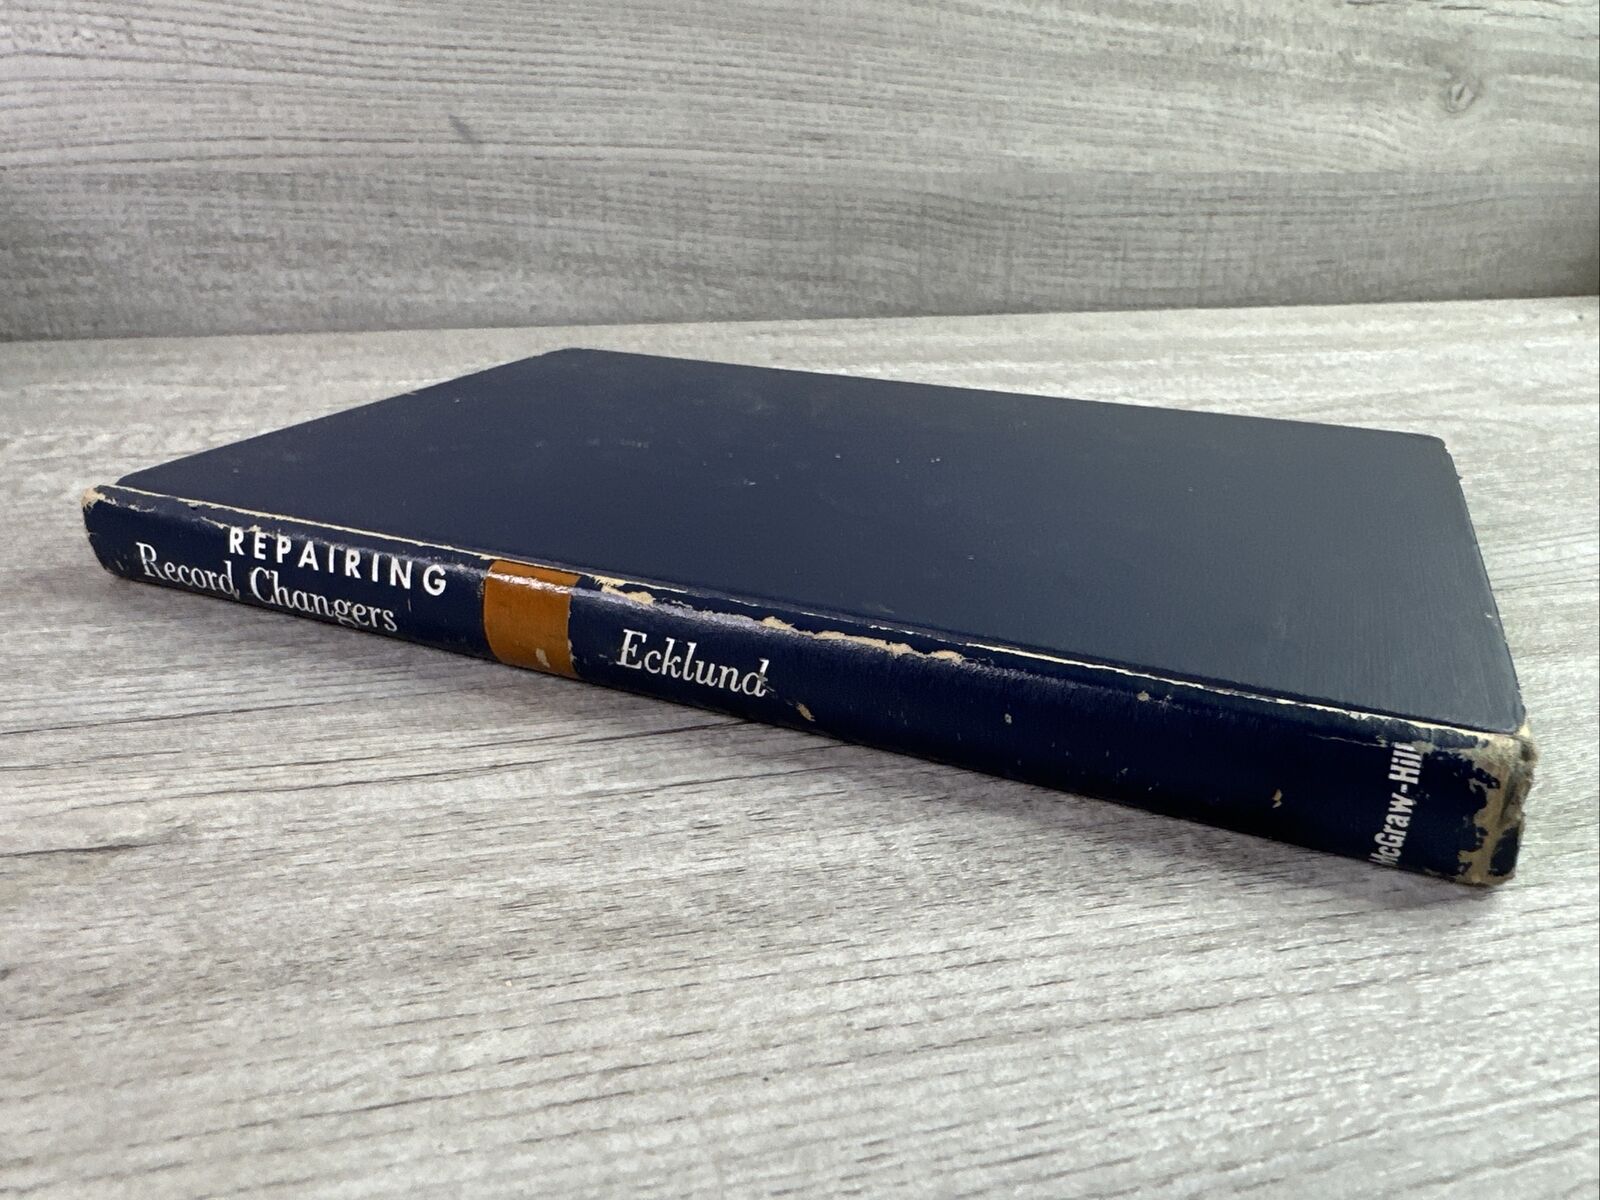 Vintage 1955 Repairing Record Changers Book by Eugene Ecklund Hardcover